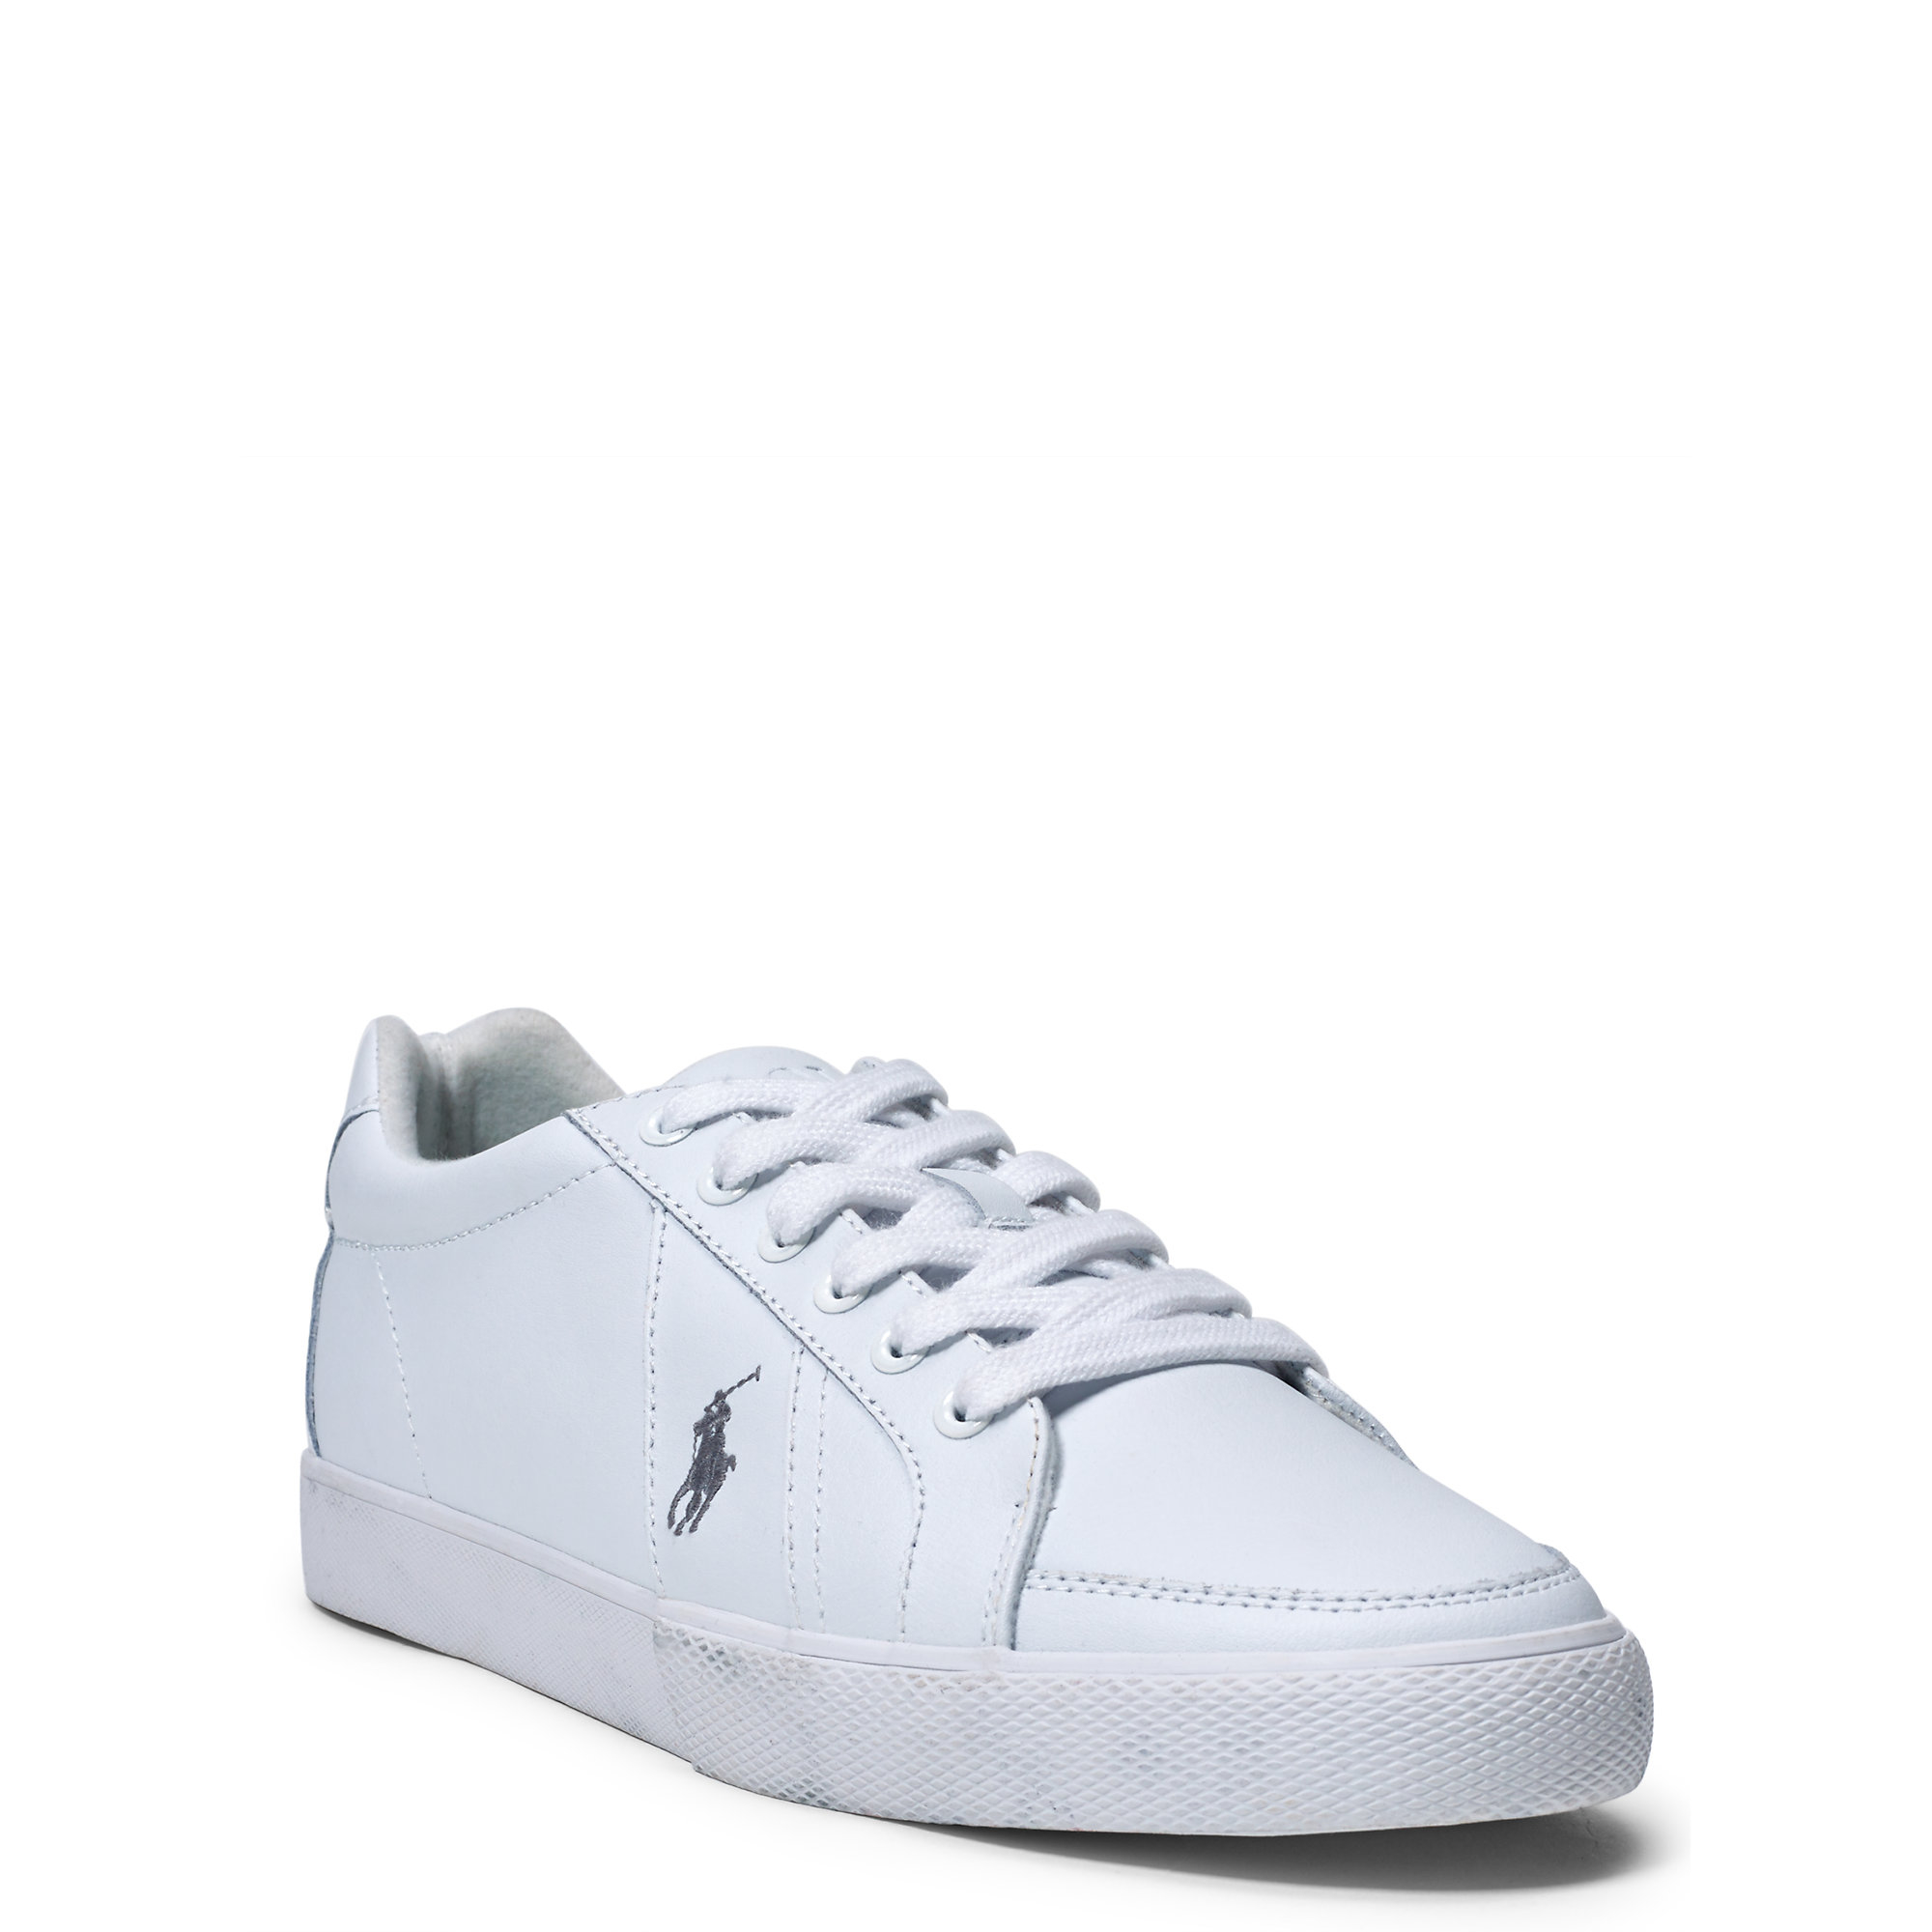 Polo Ralph Lauren Leather Sneakers Netherlands, SAVE 43% - mpgc.net